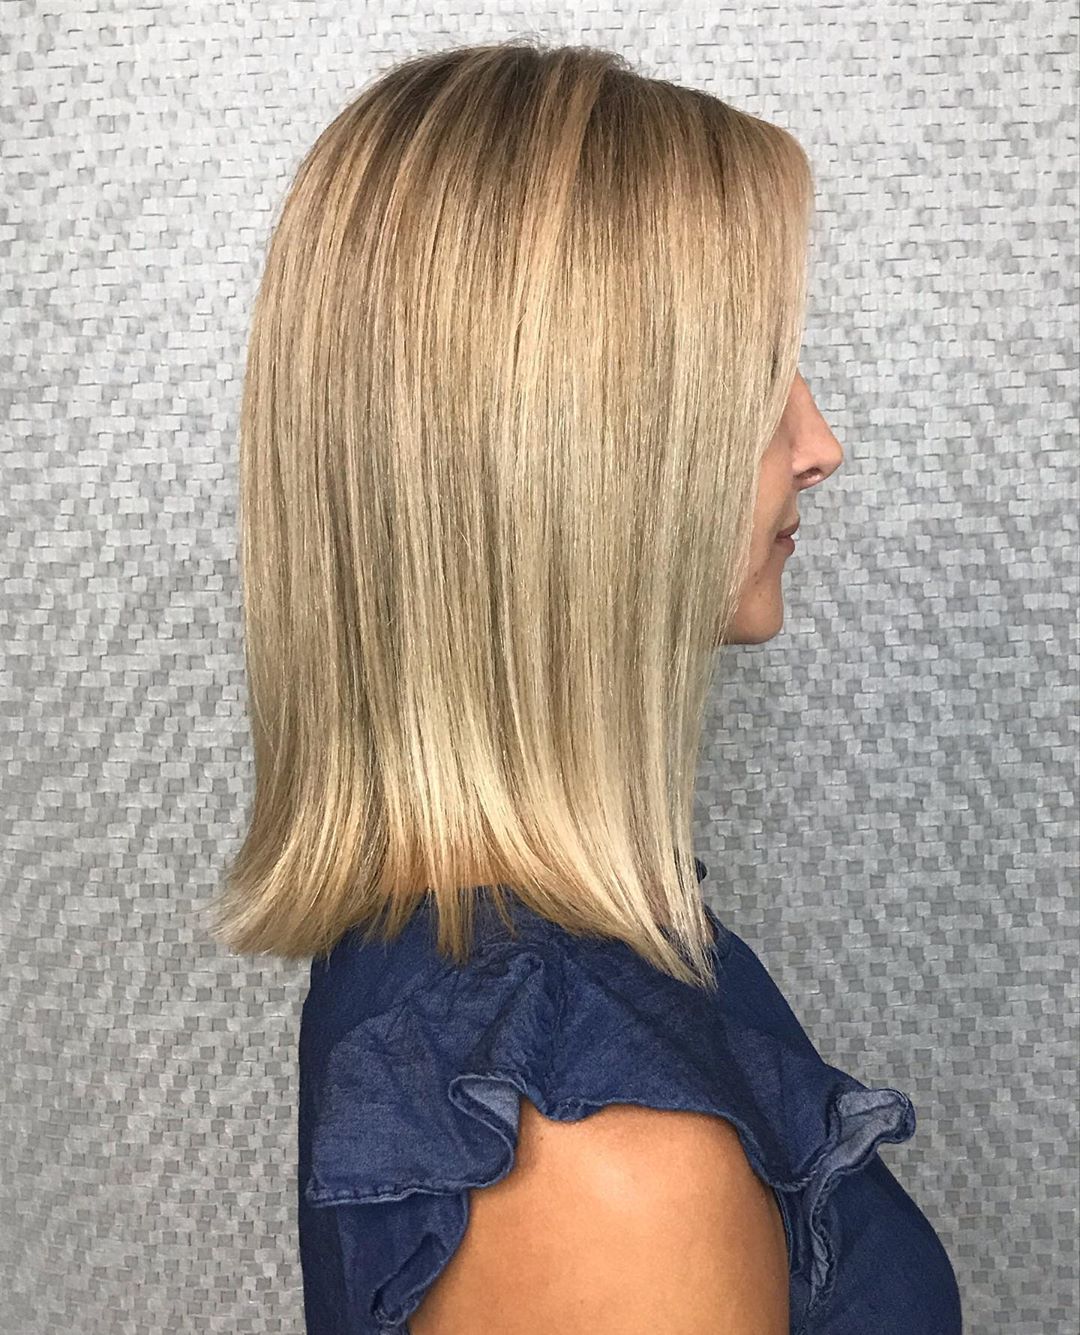 The Classic Shoulder Length Bob Hairstyle